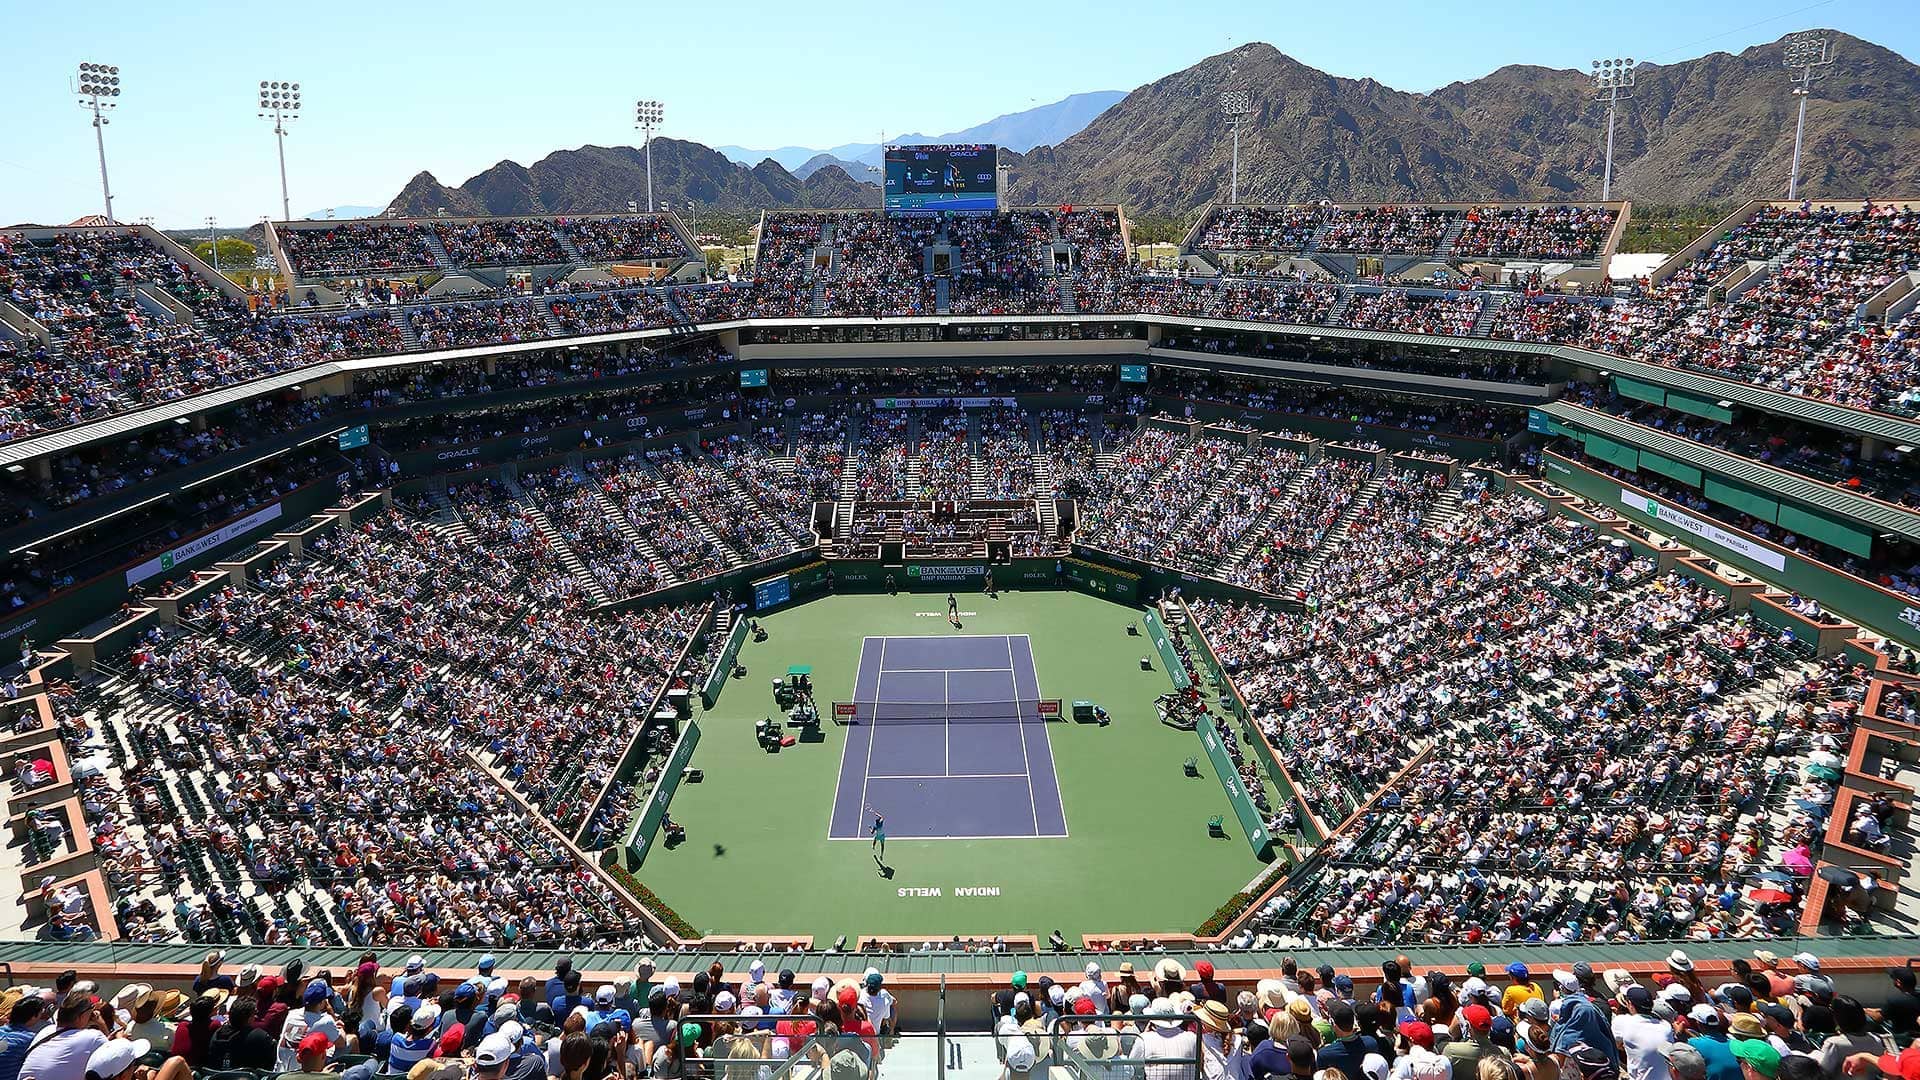 The 2021 BNP Paribas Open, featuring 16 of the Top 20 players, will be held in Indian Wells from 7-17 October. 